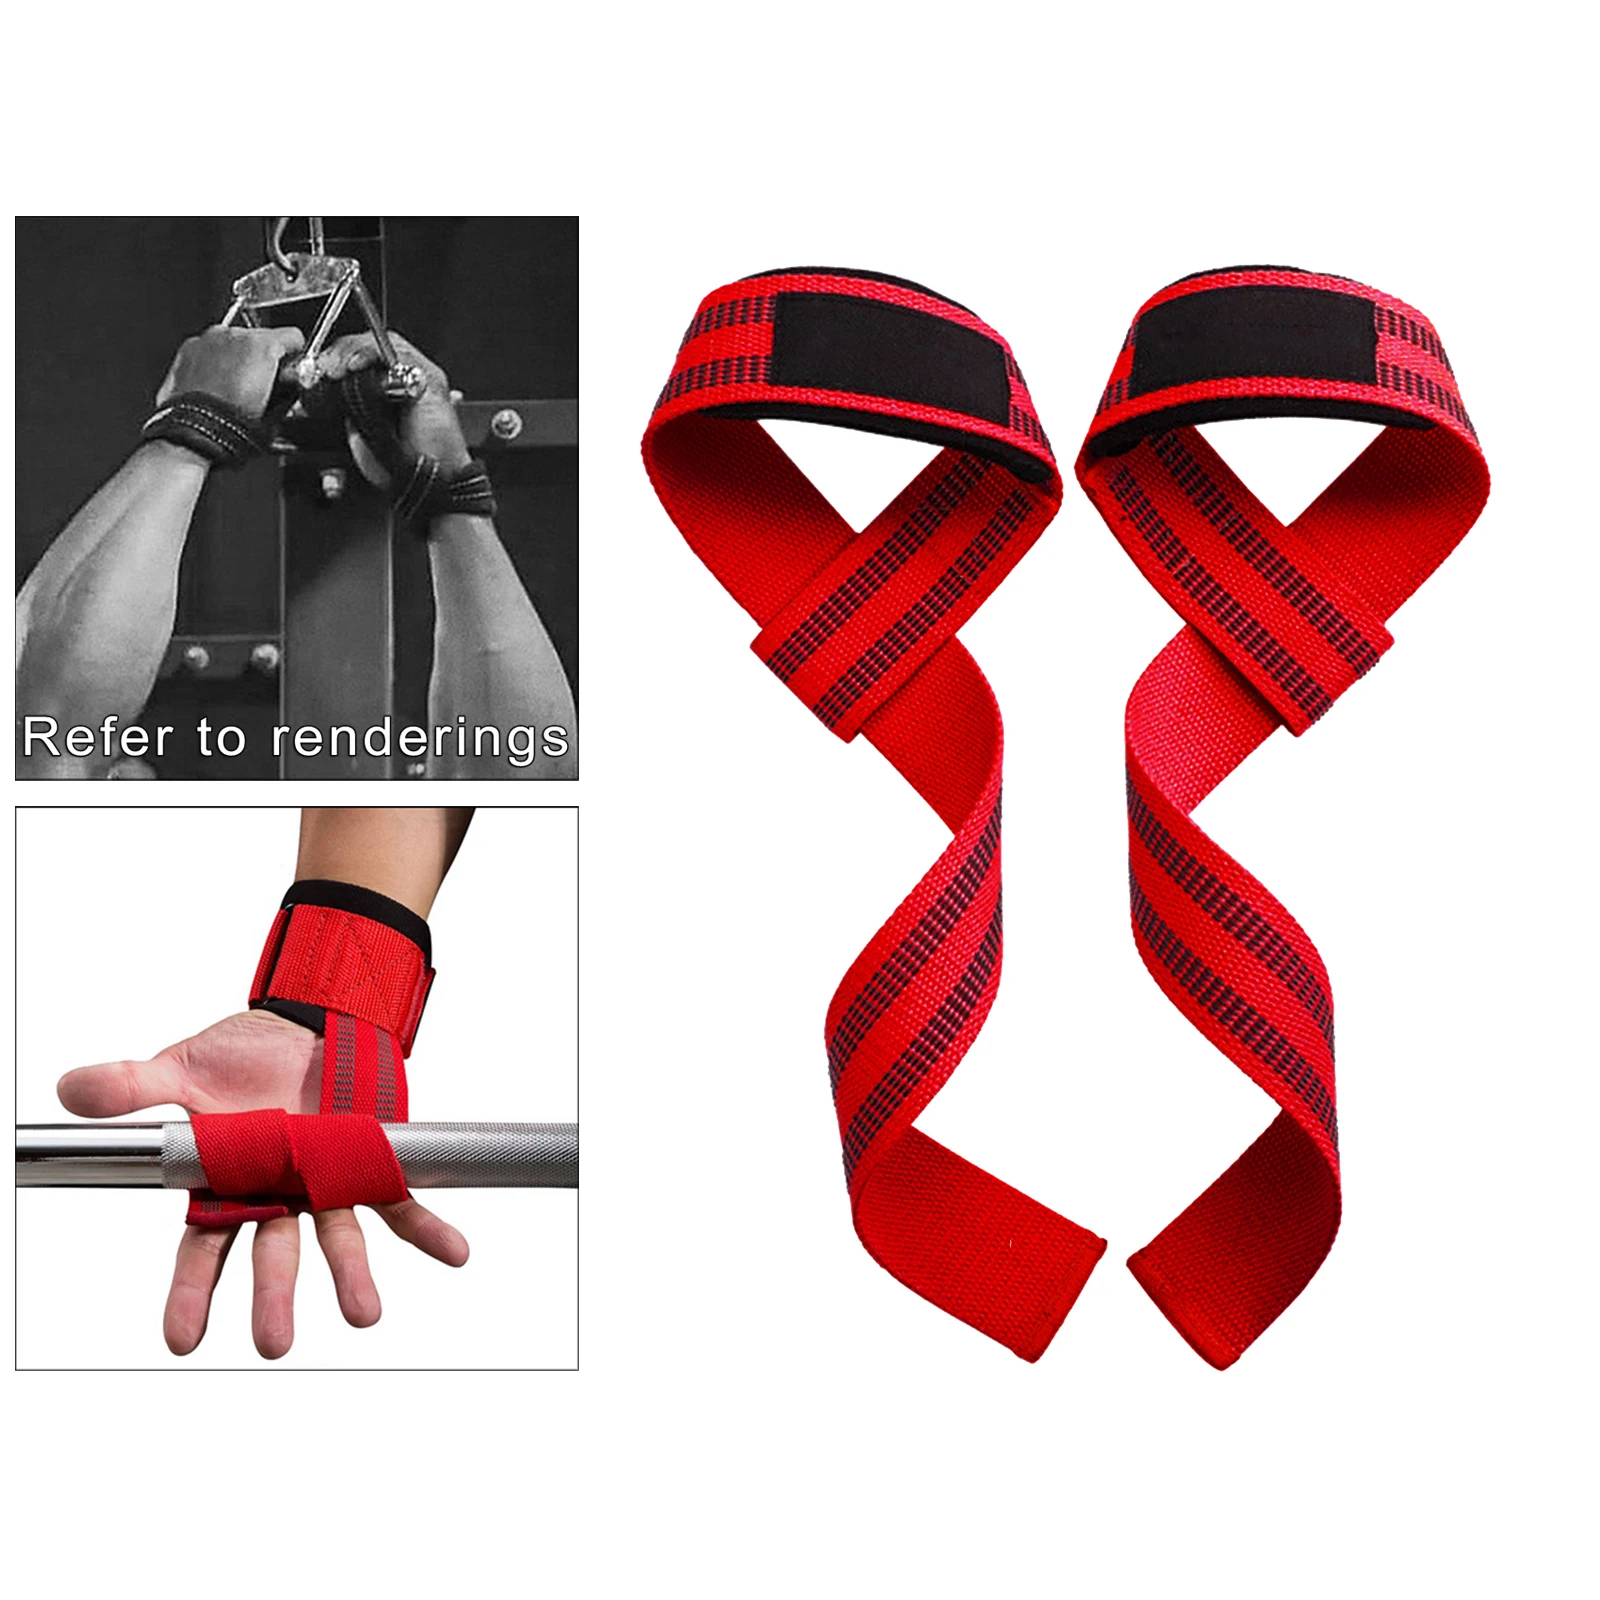 Padded Wrist Wraps Weight Lifting Training Gym Straps support Wrist Protector x1 